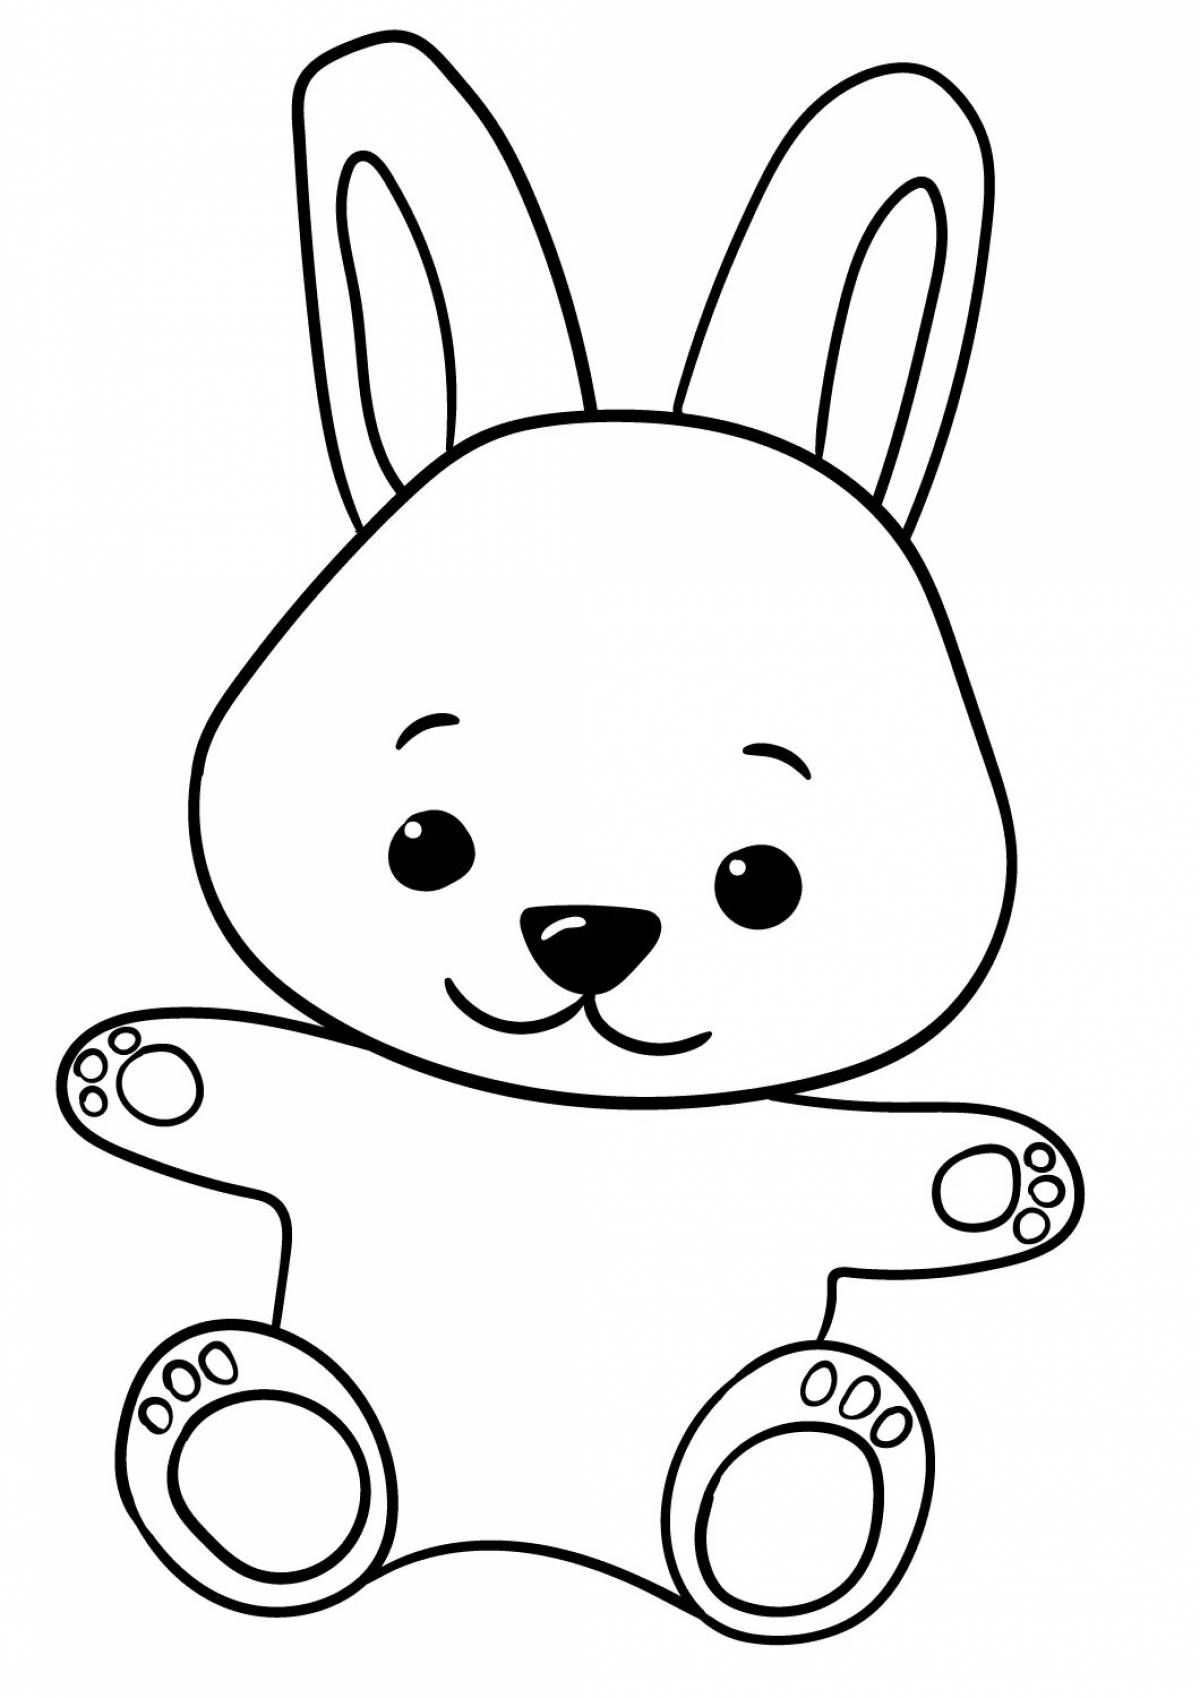 Glittering bear and rabbit coloring page